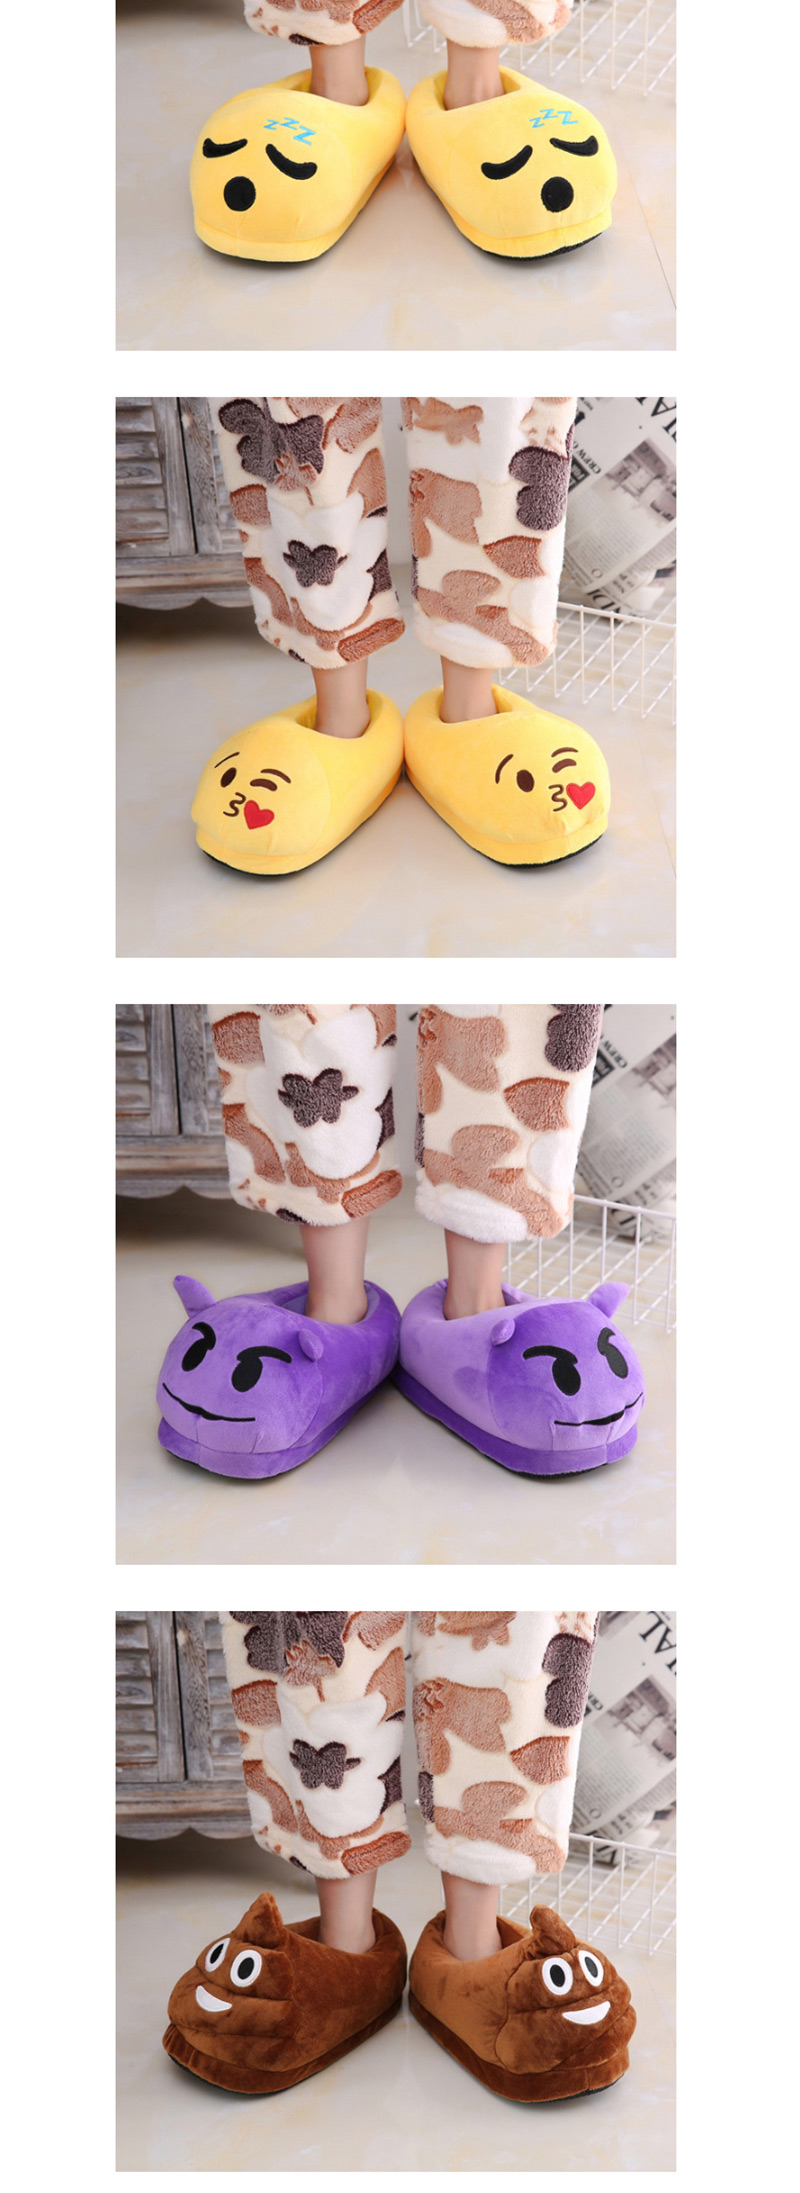 Fashion 14 Yellow Dollars Cartoon Expression Plush Bag With Cotton Slippers,Slippers